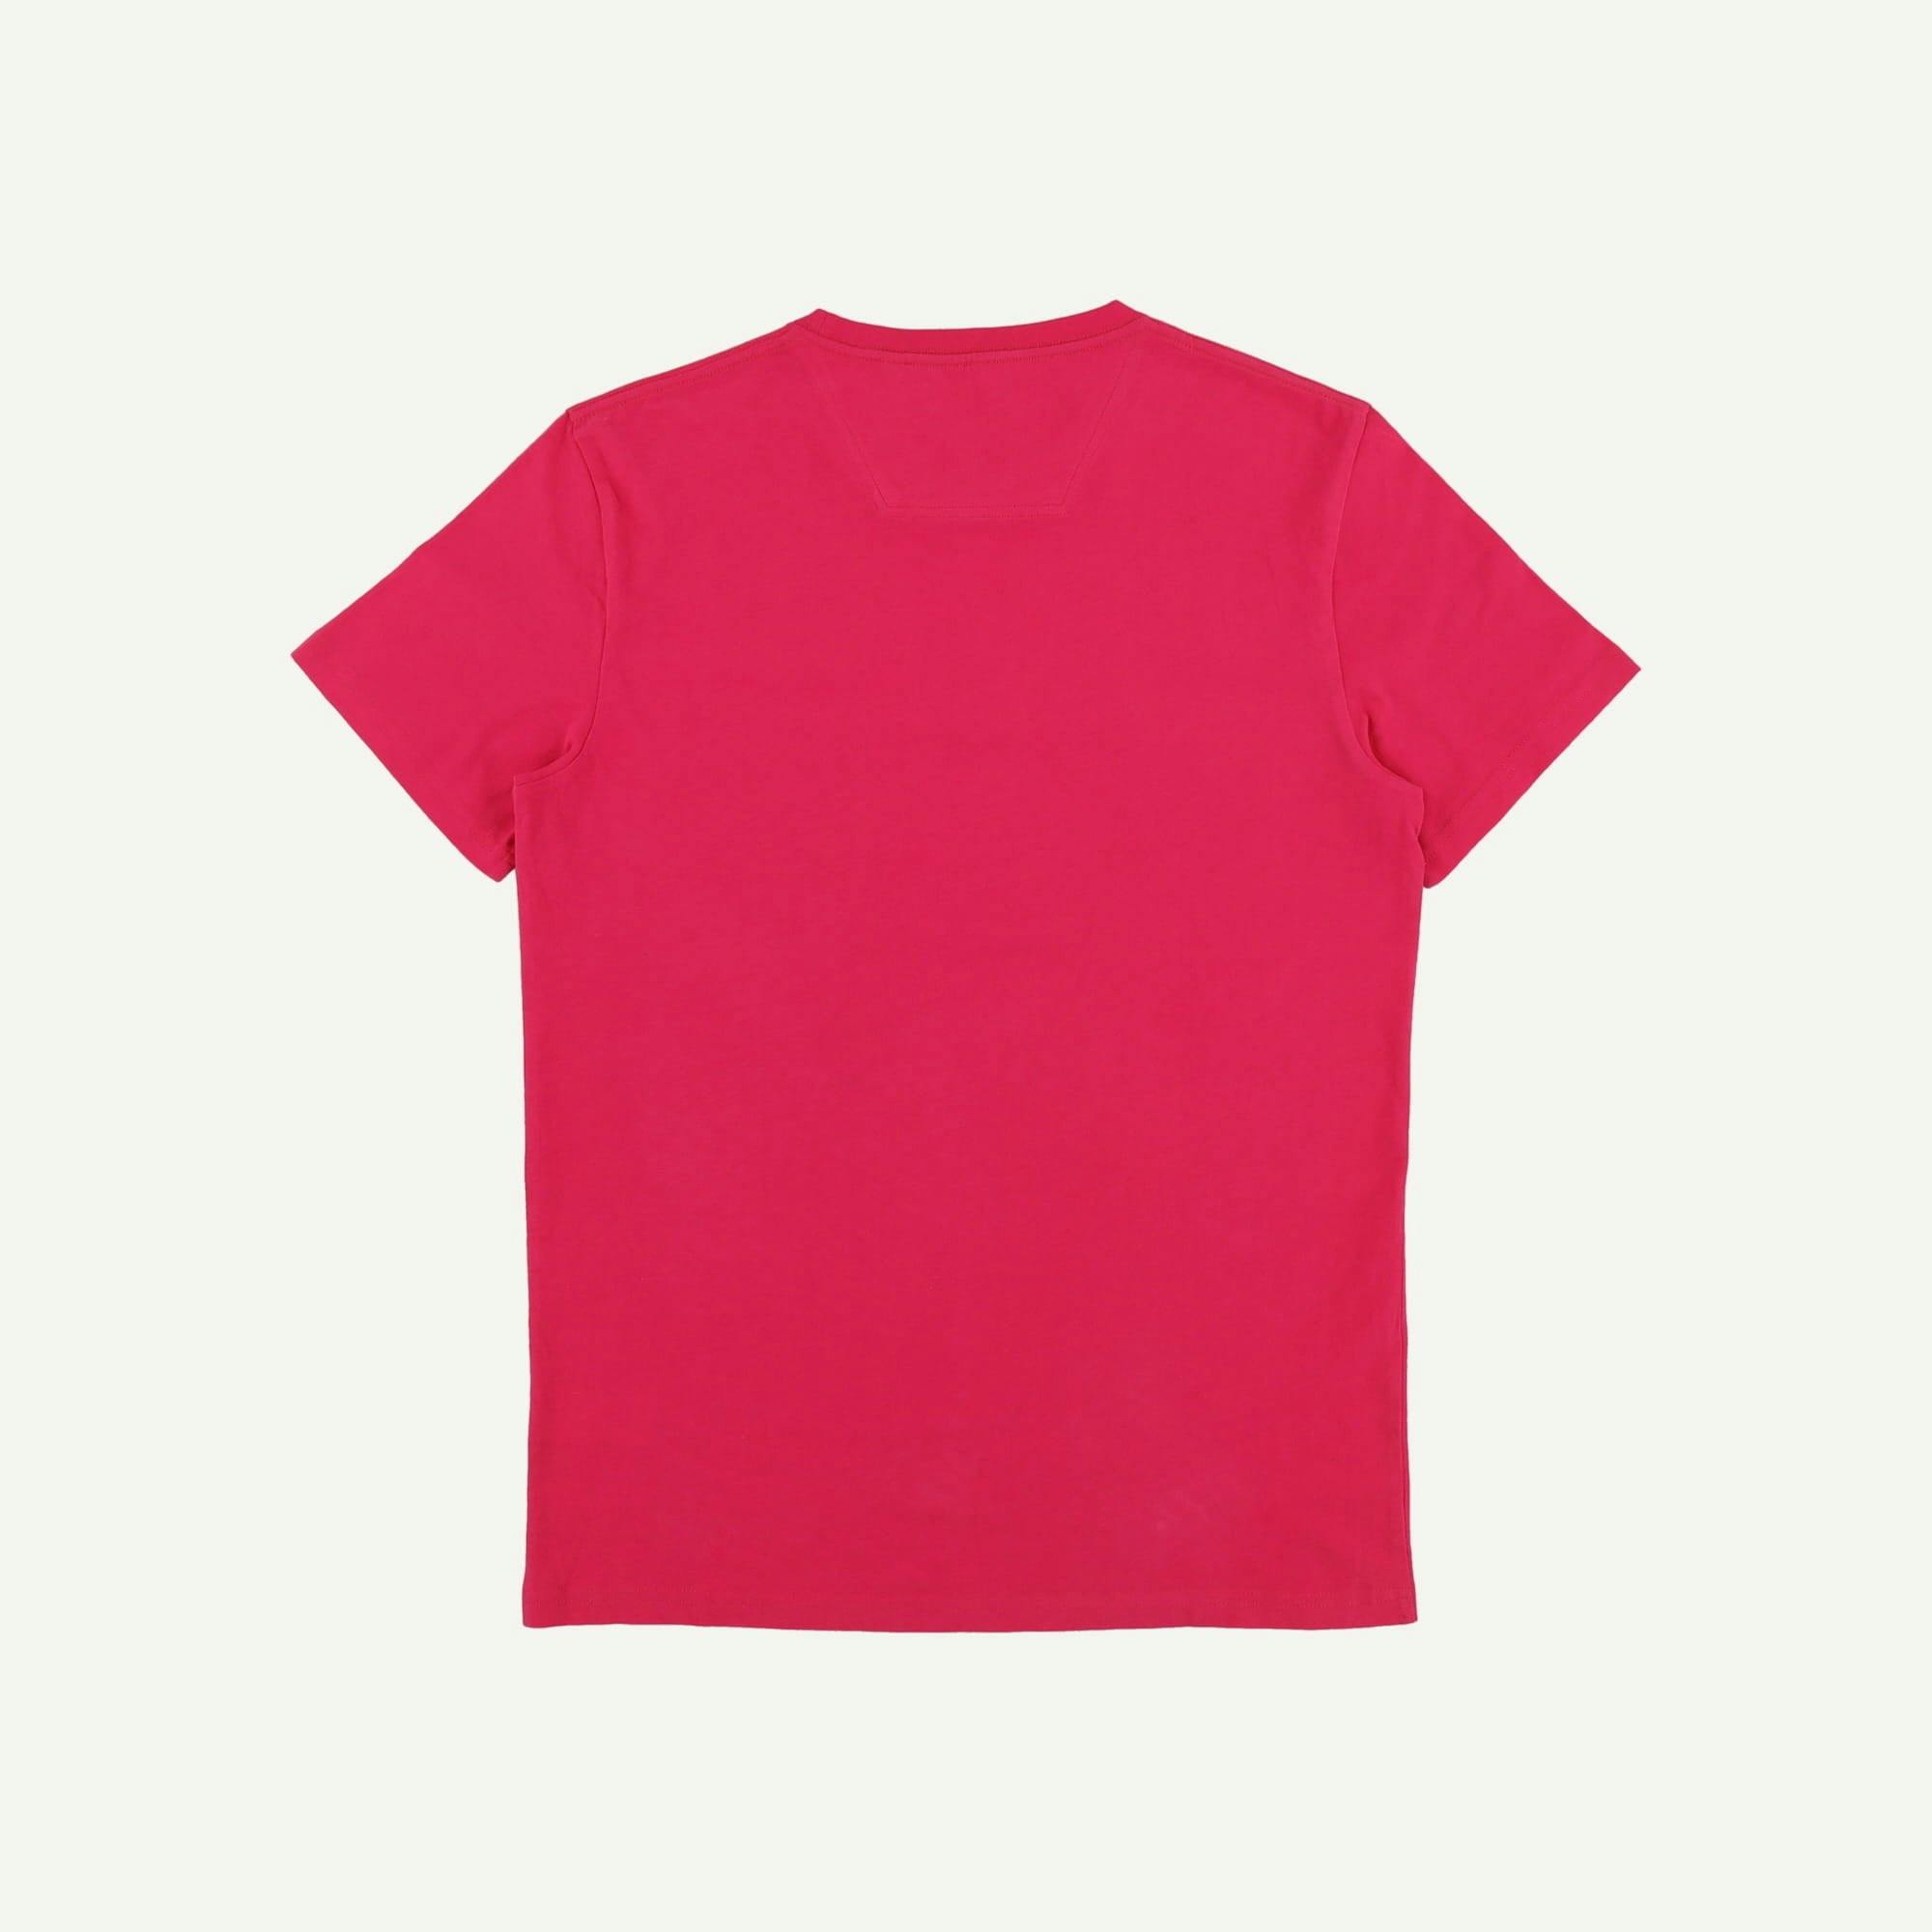 Joules As new Pink T-shirt